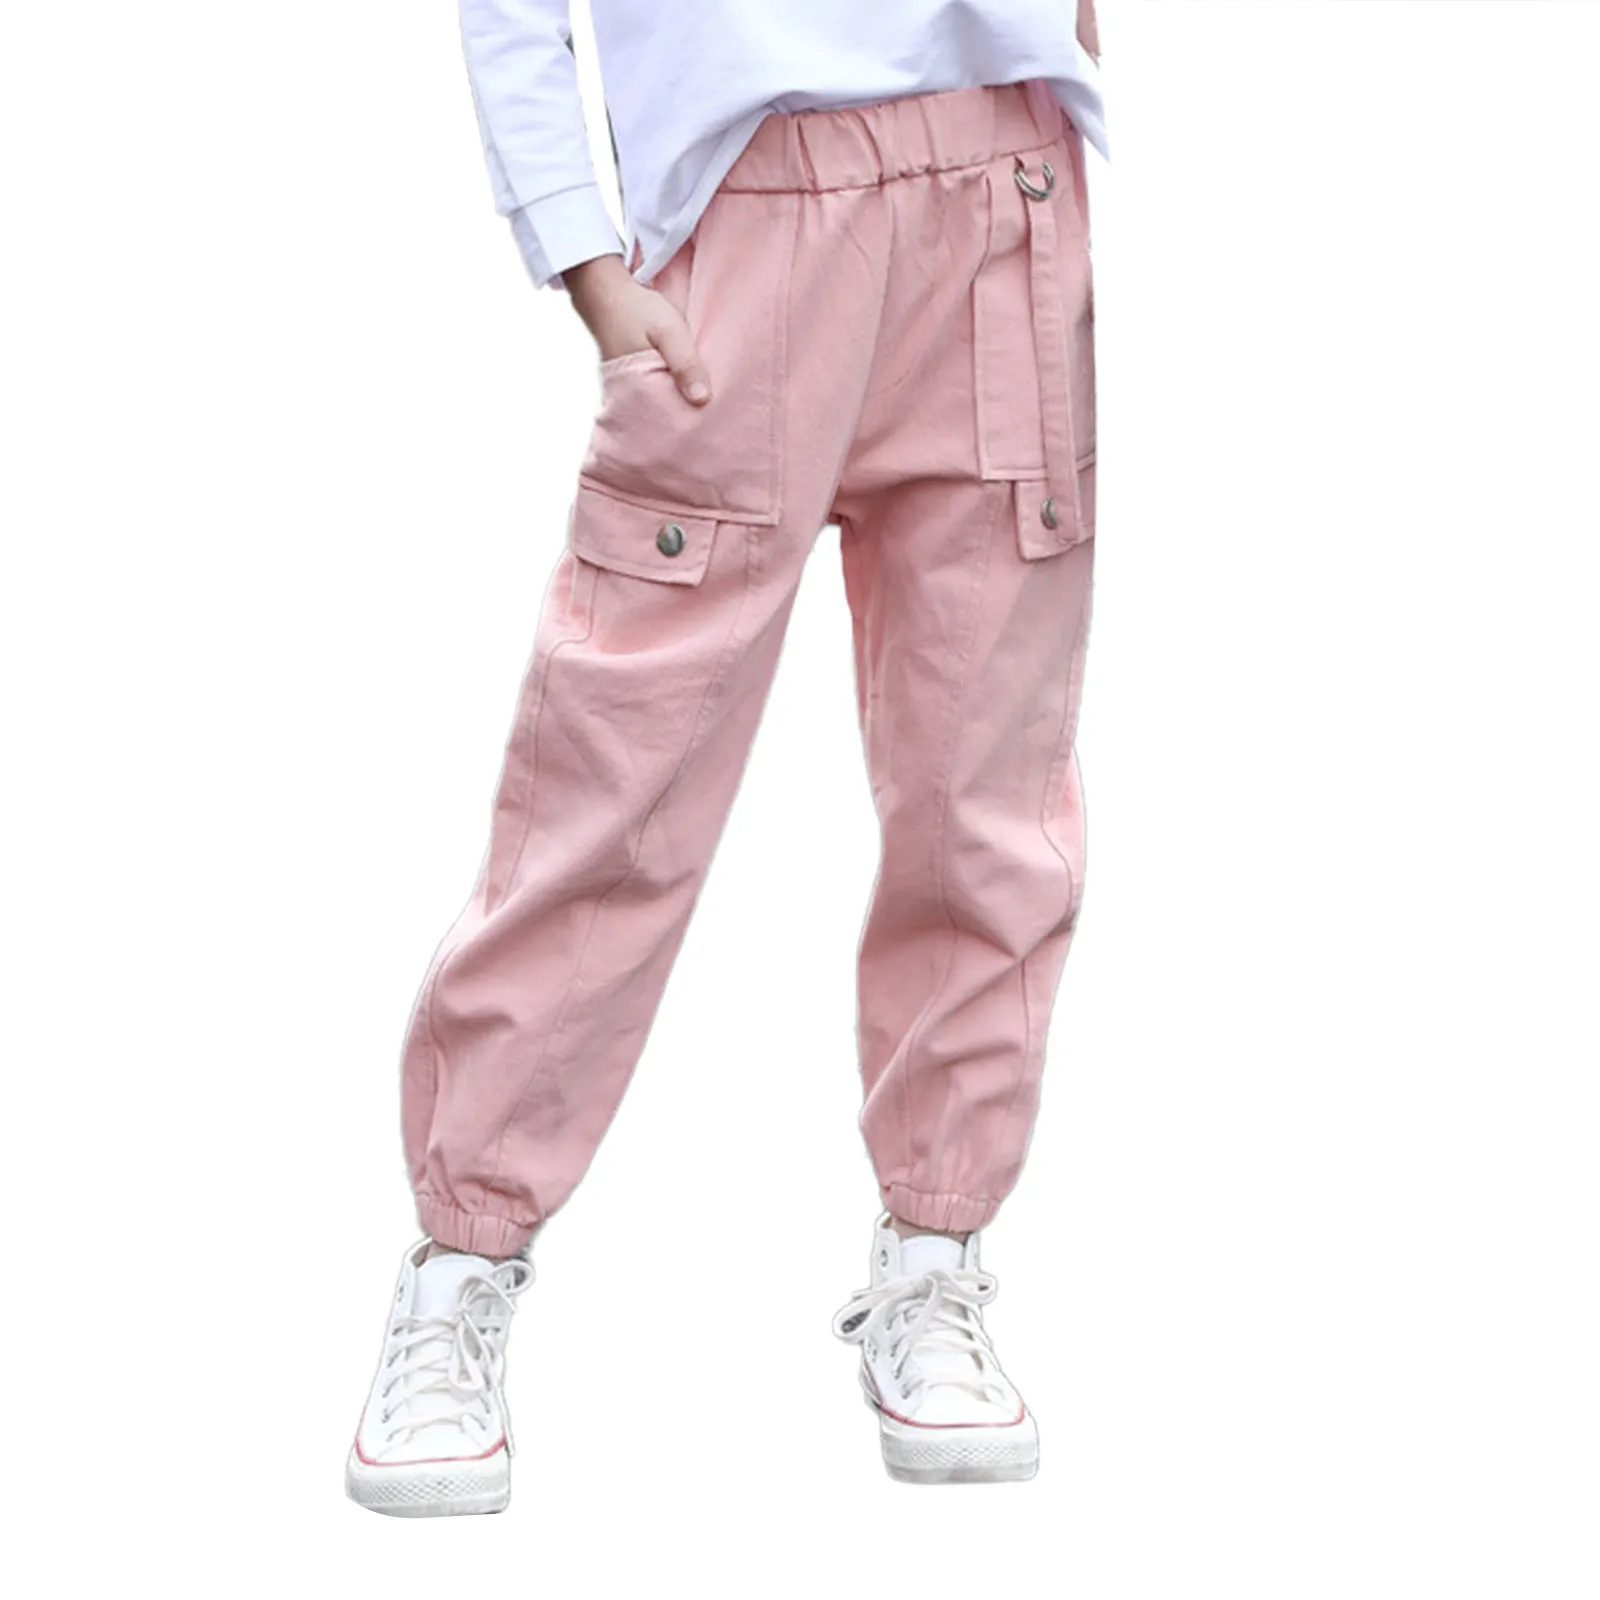 Oyolan Kids Girls Casual Cargo Jogger Pants with Pocket Hip Hop Streetwear Athletic Sports Baggy Trousers 